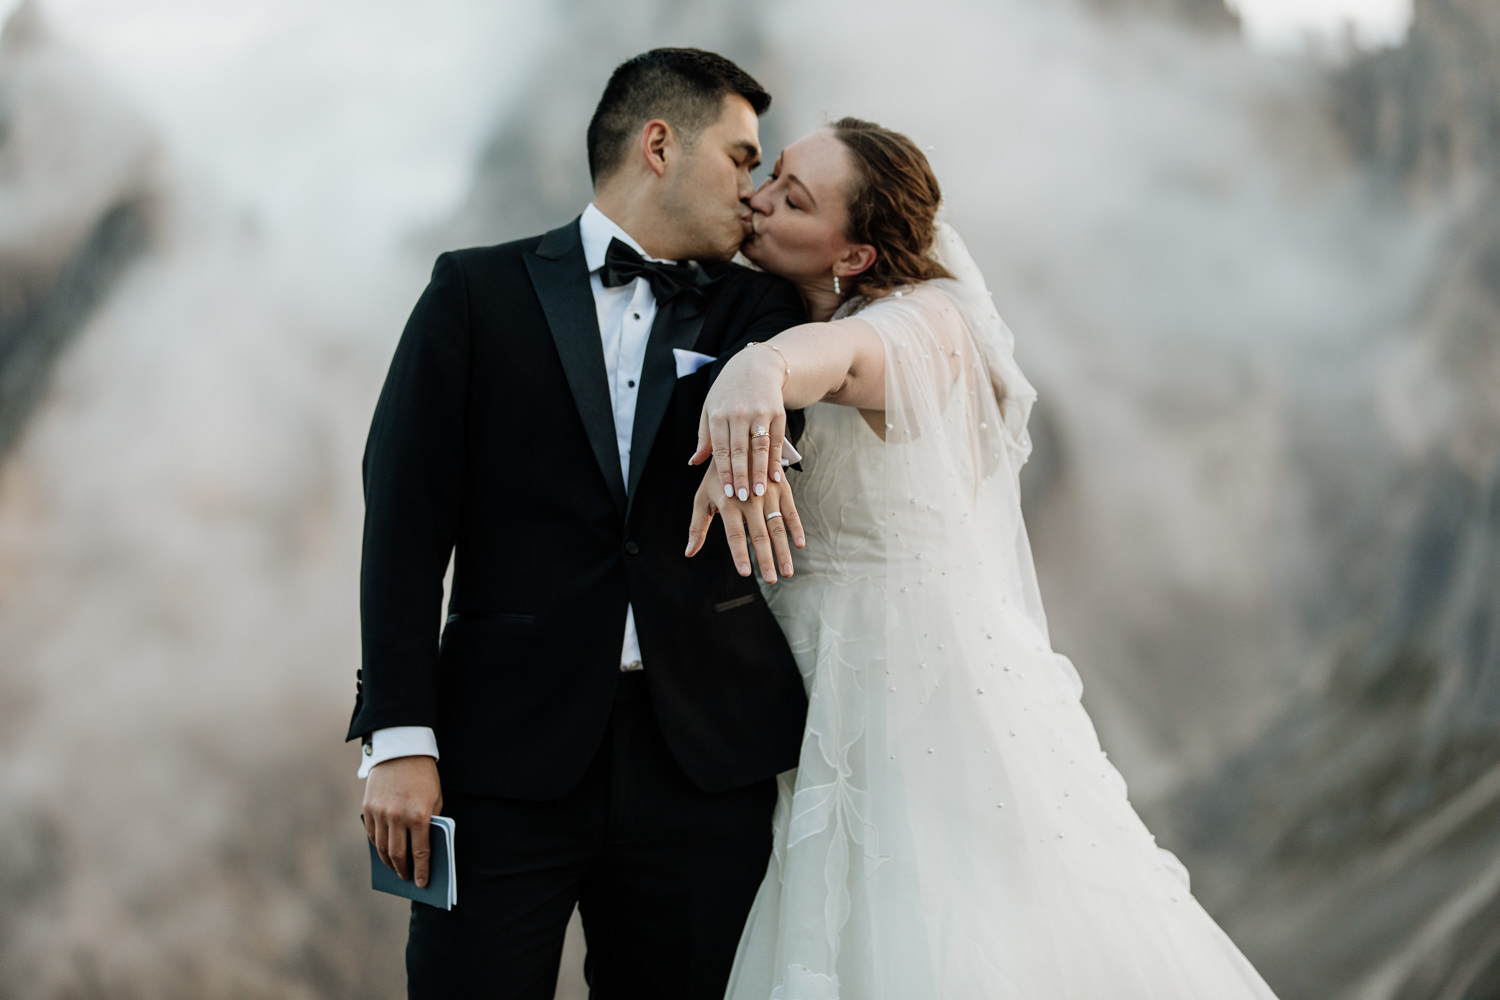 A couple stand in the middle of the frame holding out their hands to show their wedding rings. They are framed by the jagged, mist covered mountain peaks of the Cadini di Misurina range in Tre Cime national park. They are wearing a black tux and wedding dress, posing for their elopement photos.